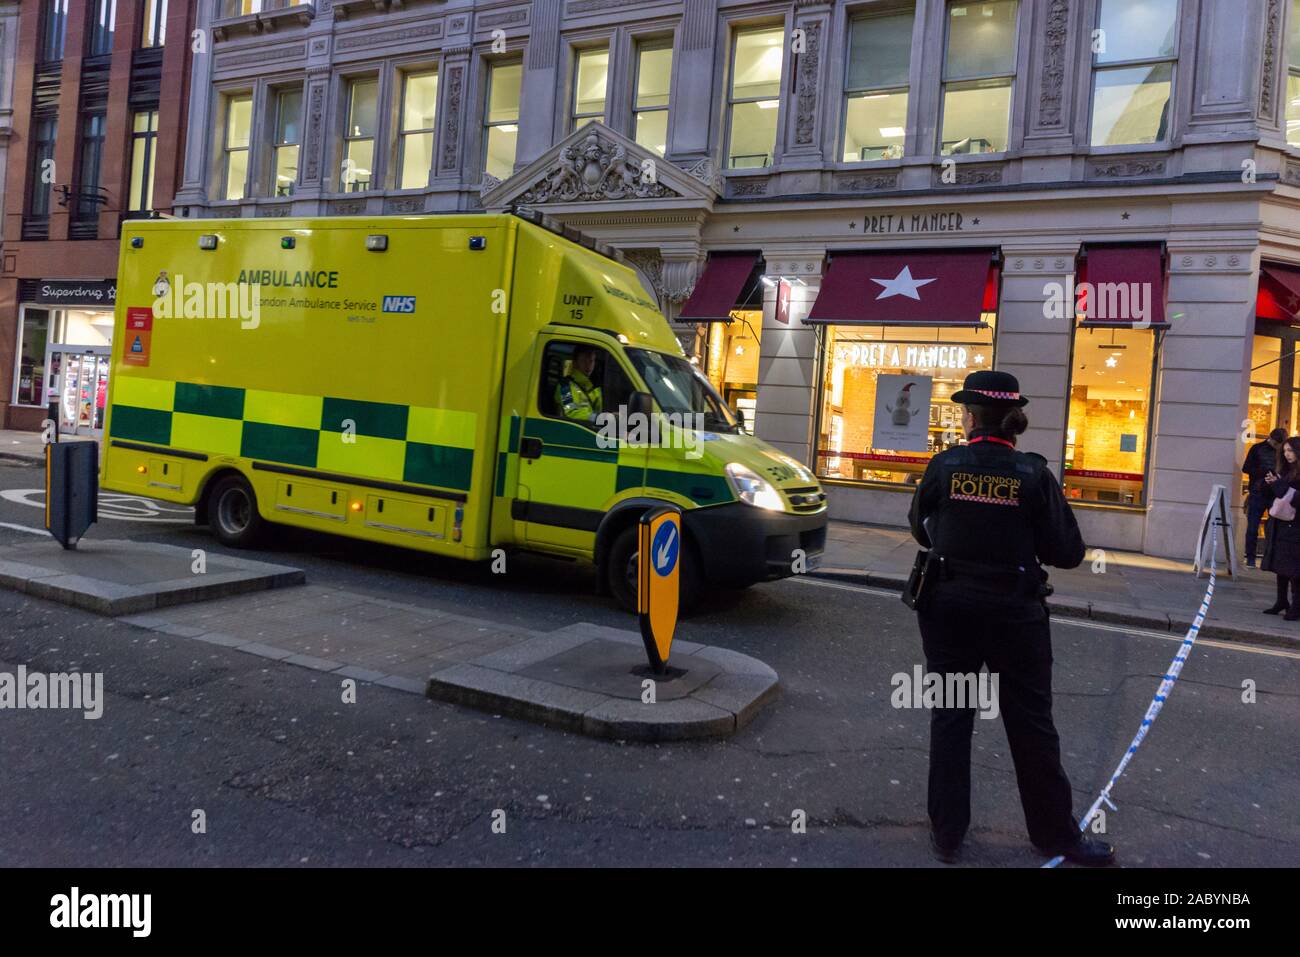 London Bridge, London, UK. 29th Nov, 2019. Police have cordoned off a large area around London Bridge after a stabbing incident and gunfire. Ambulance leaving the scene. People are being moved away from the area Stock Photo